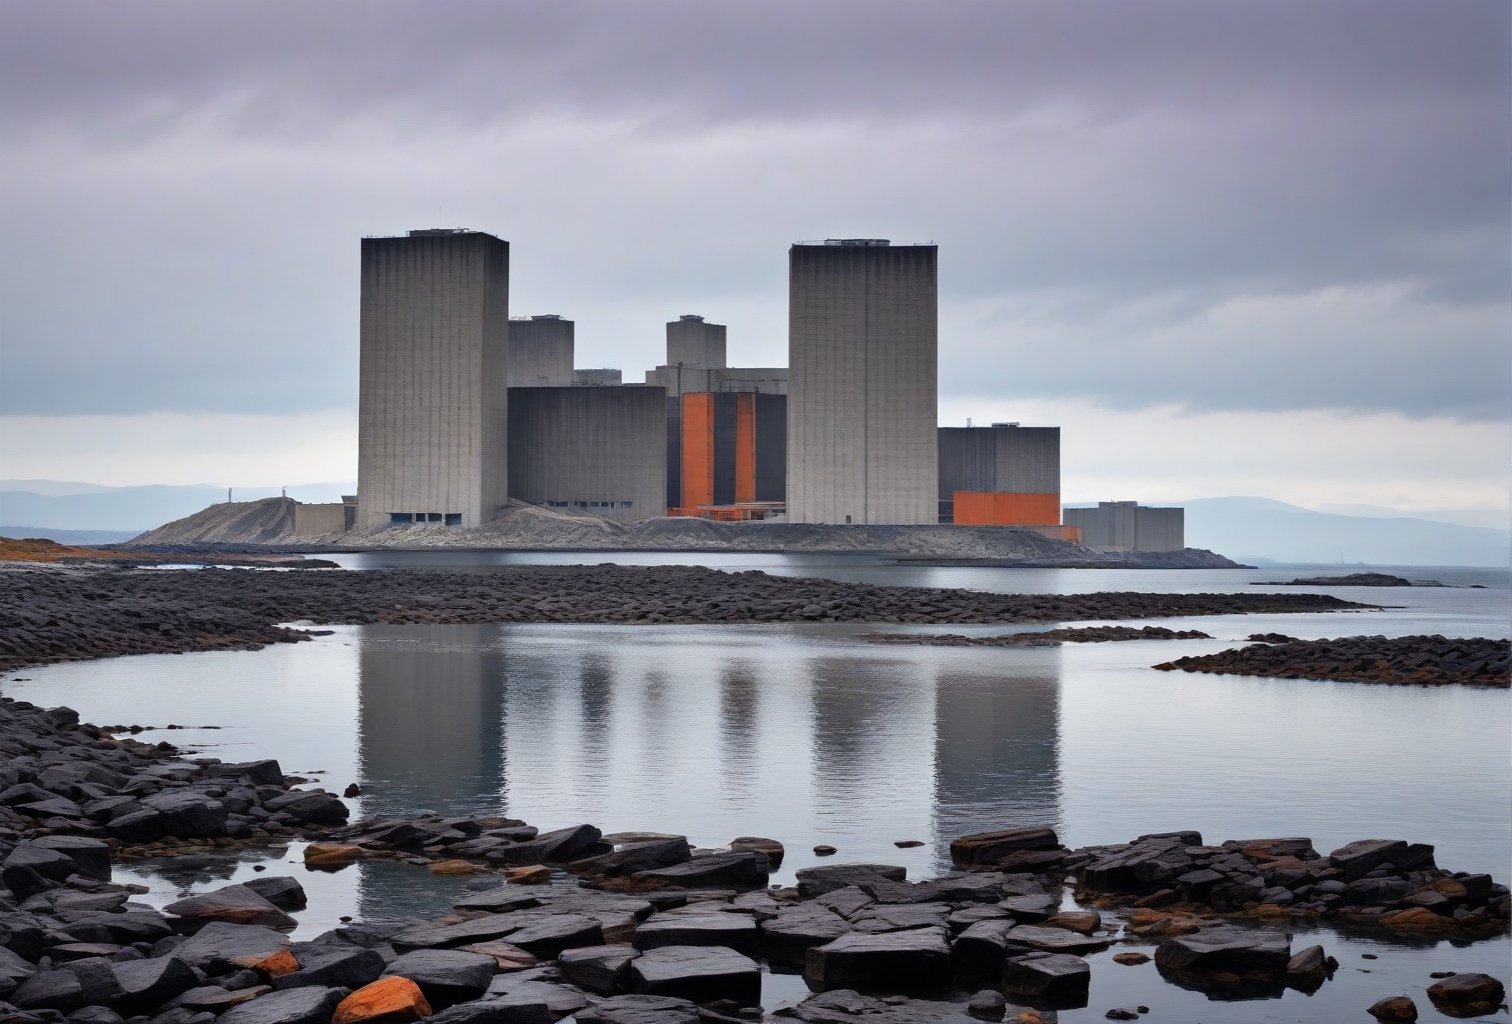 rocky coast without vegetation made of gray stone, gray water reflects, thin rectangular square dark brown skyscrapers with rectangular vertical frequent narrow windows, a cooling tower can be seen on the side on a separate stone island, low gray clouds often seeping through, and a few dark orange ones,
the sky is blue with a hint of purple on the horizon is white